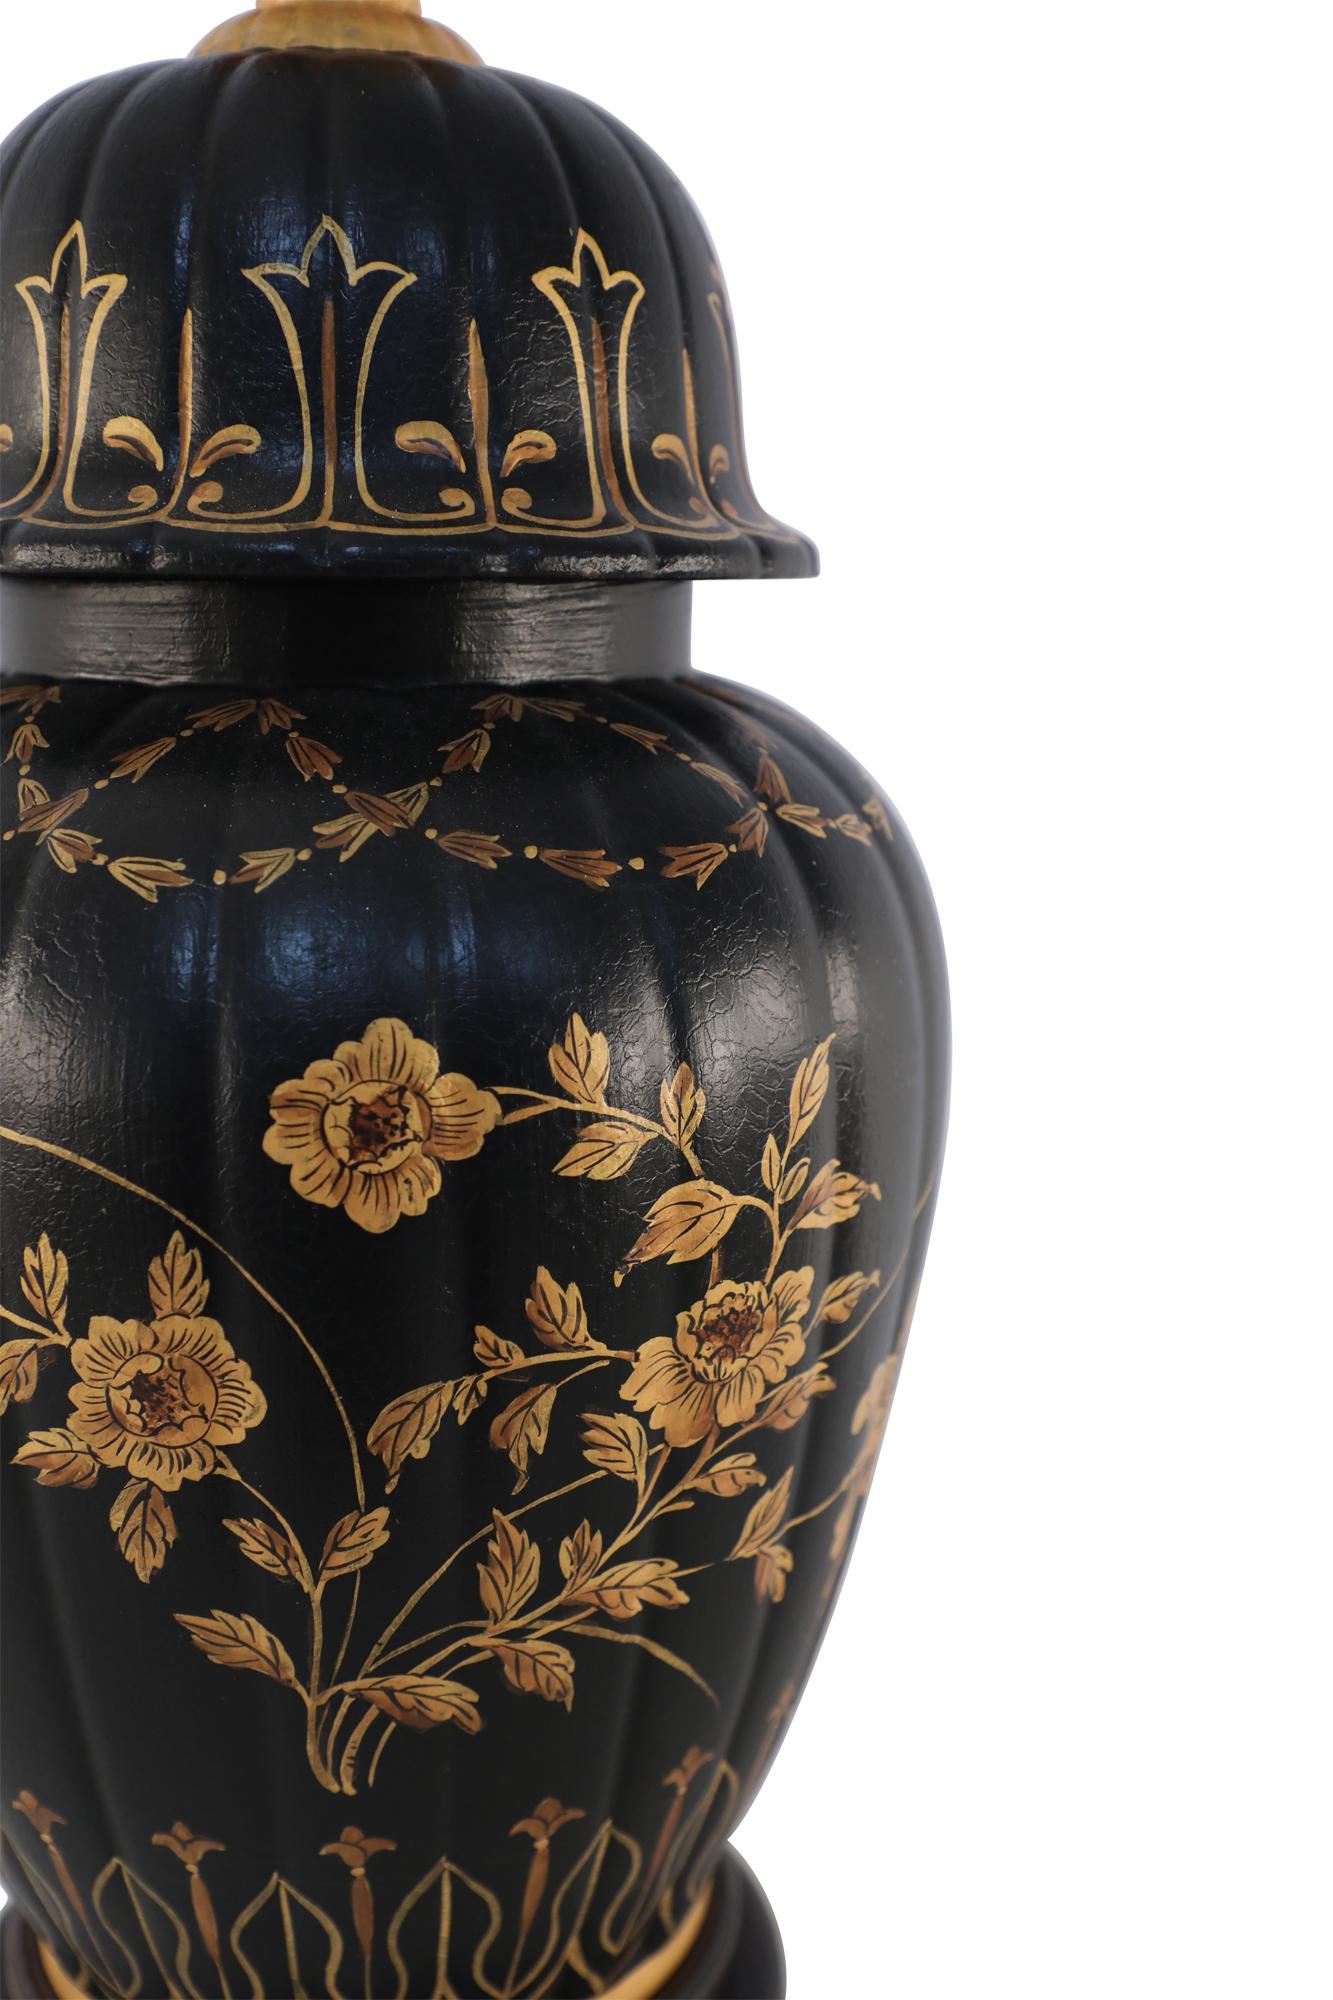 Chinese Regency Style Black and Gold Floral Lidded Urn Porcelain Table Lamp For Sale 4